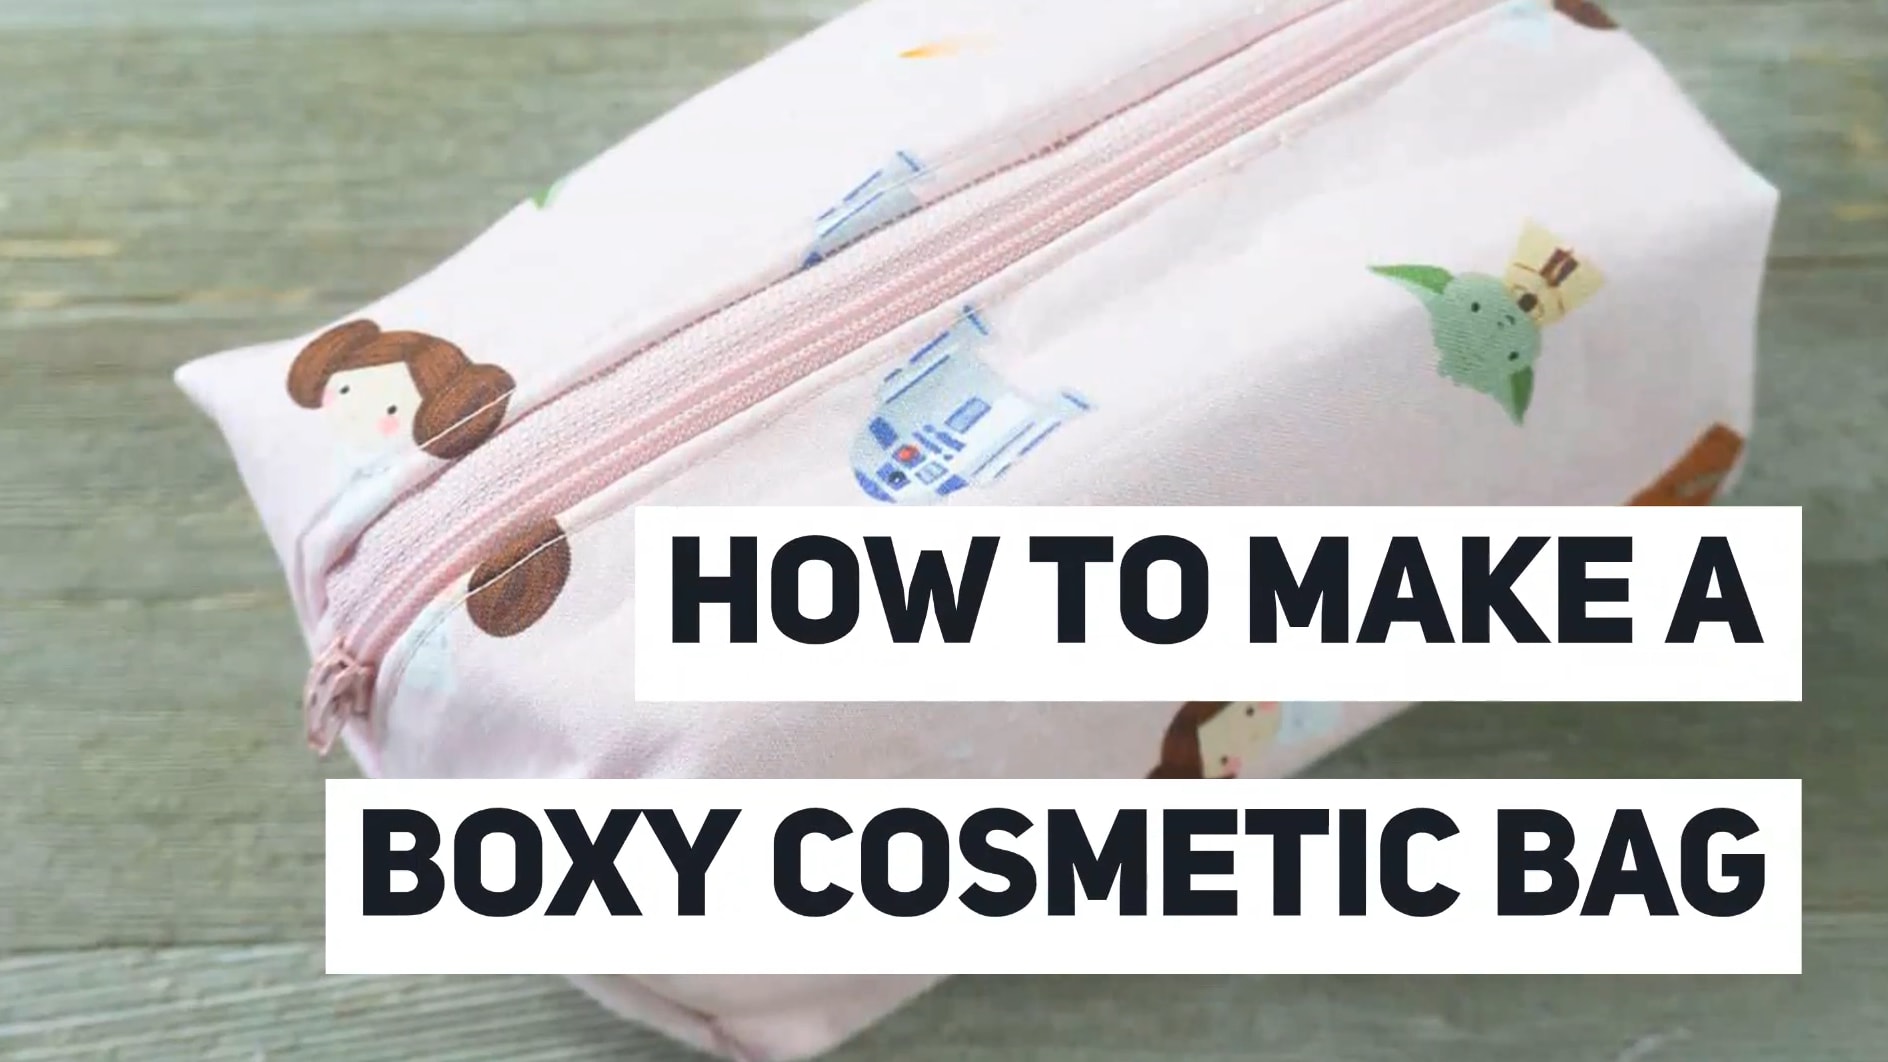 How To Make A Boxy Cosmetic Bag